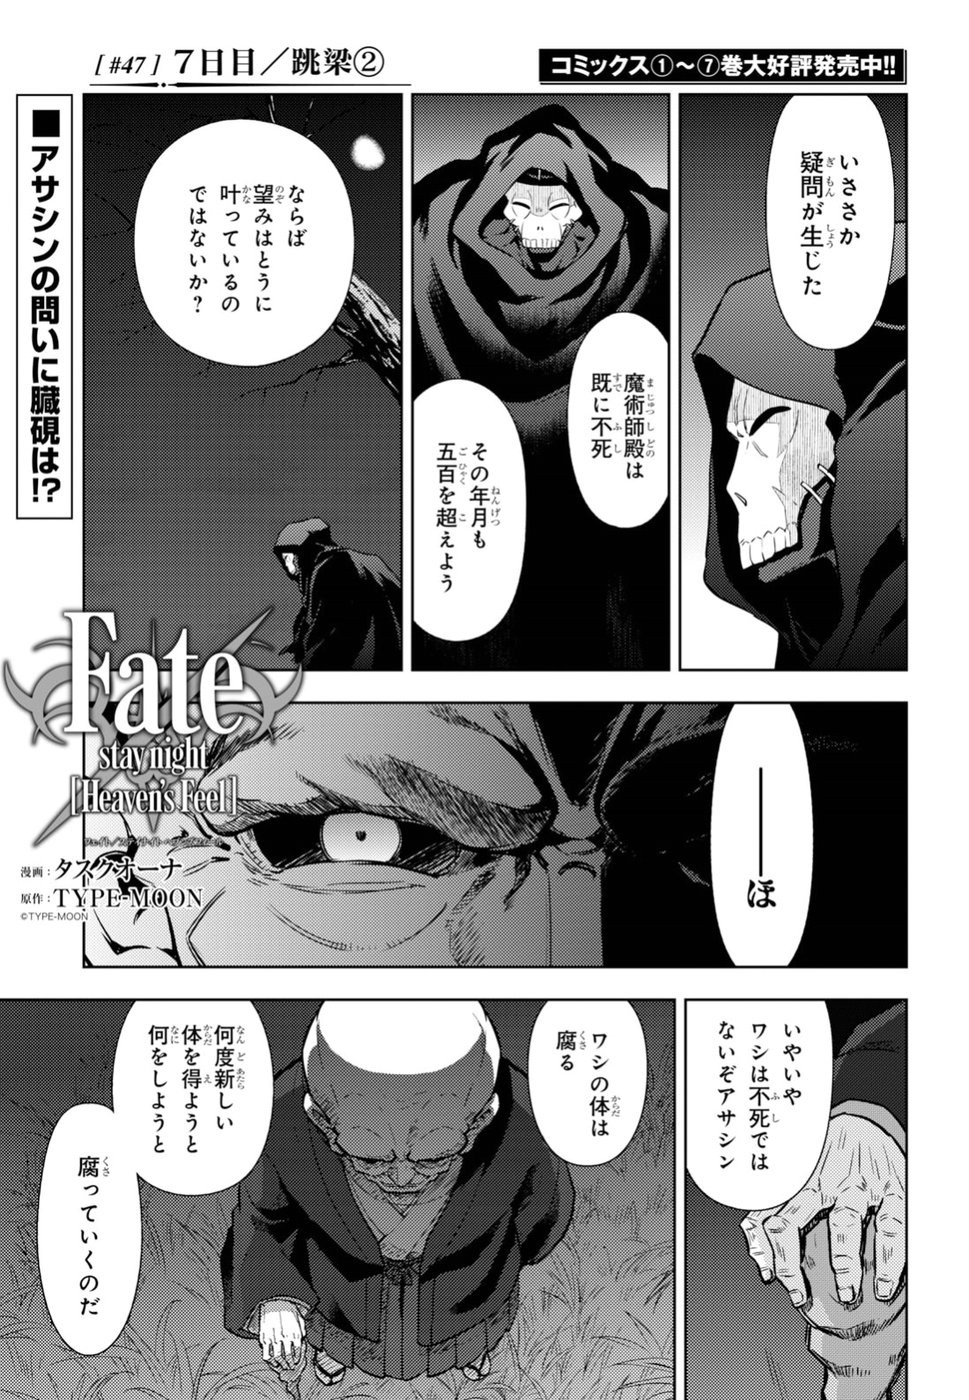 Fate/Stay night Heaven's Feel - Chapter 47 - Page 1